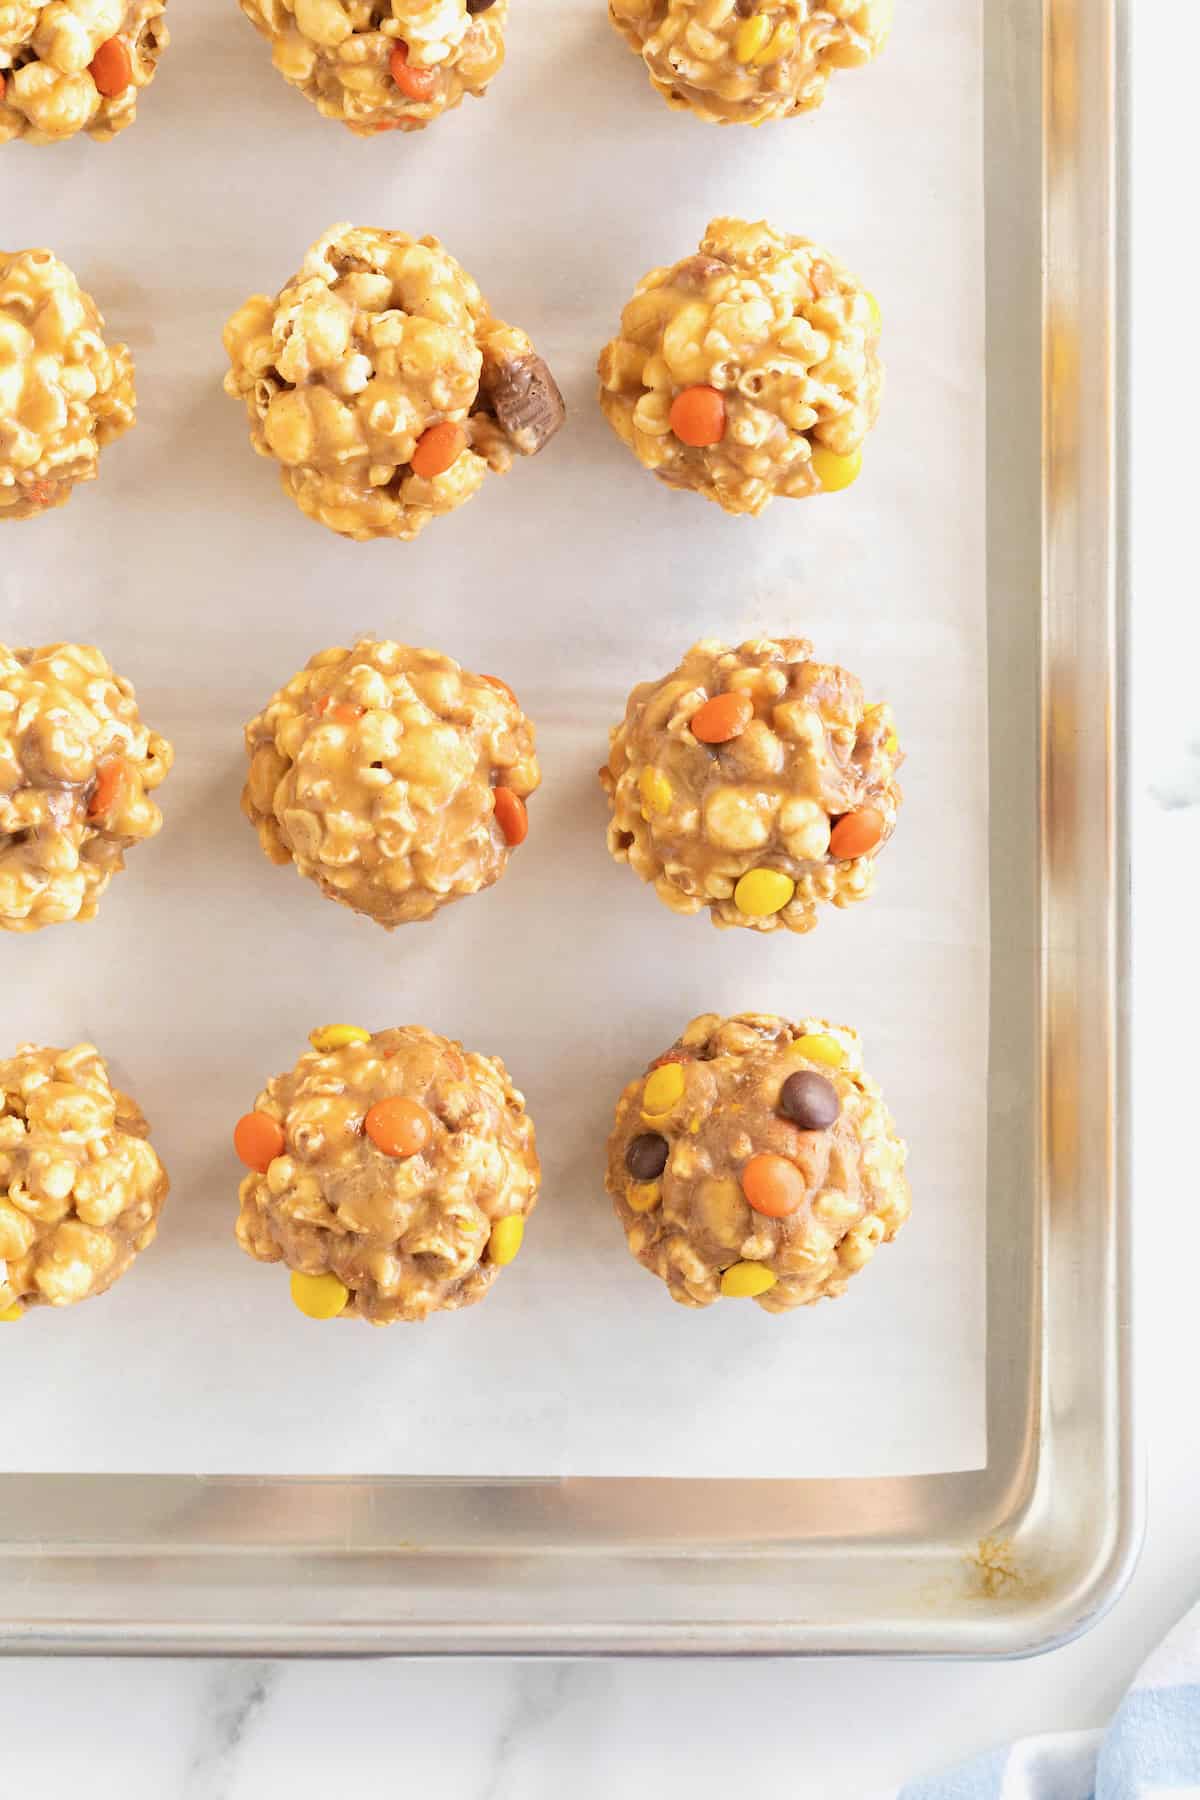 12 peanut butter popcorn balls on a parchment lined aluminum baking tray.